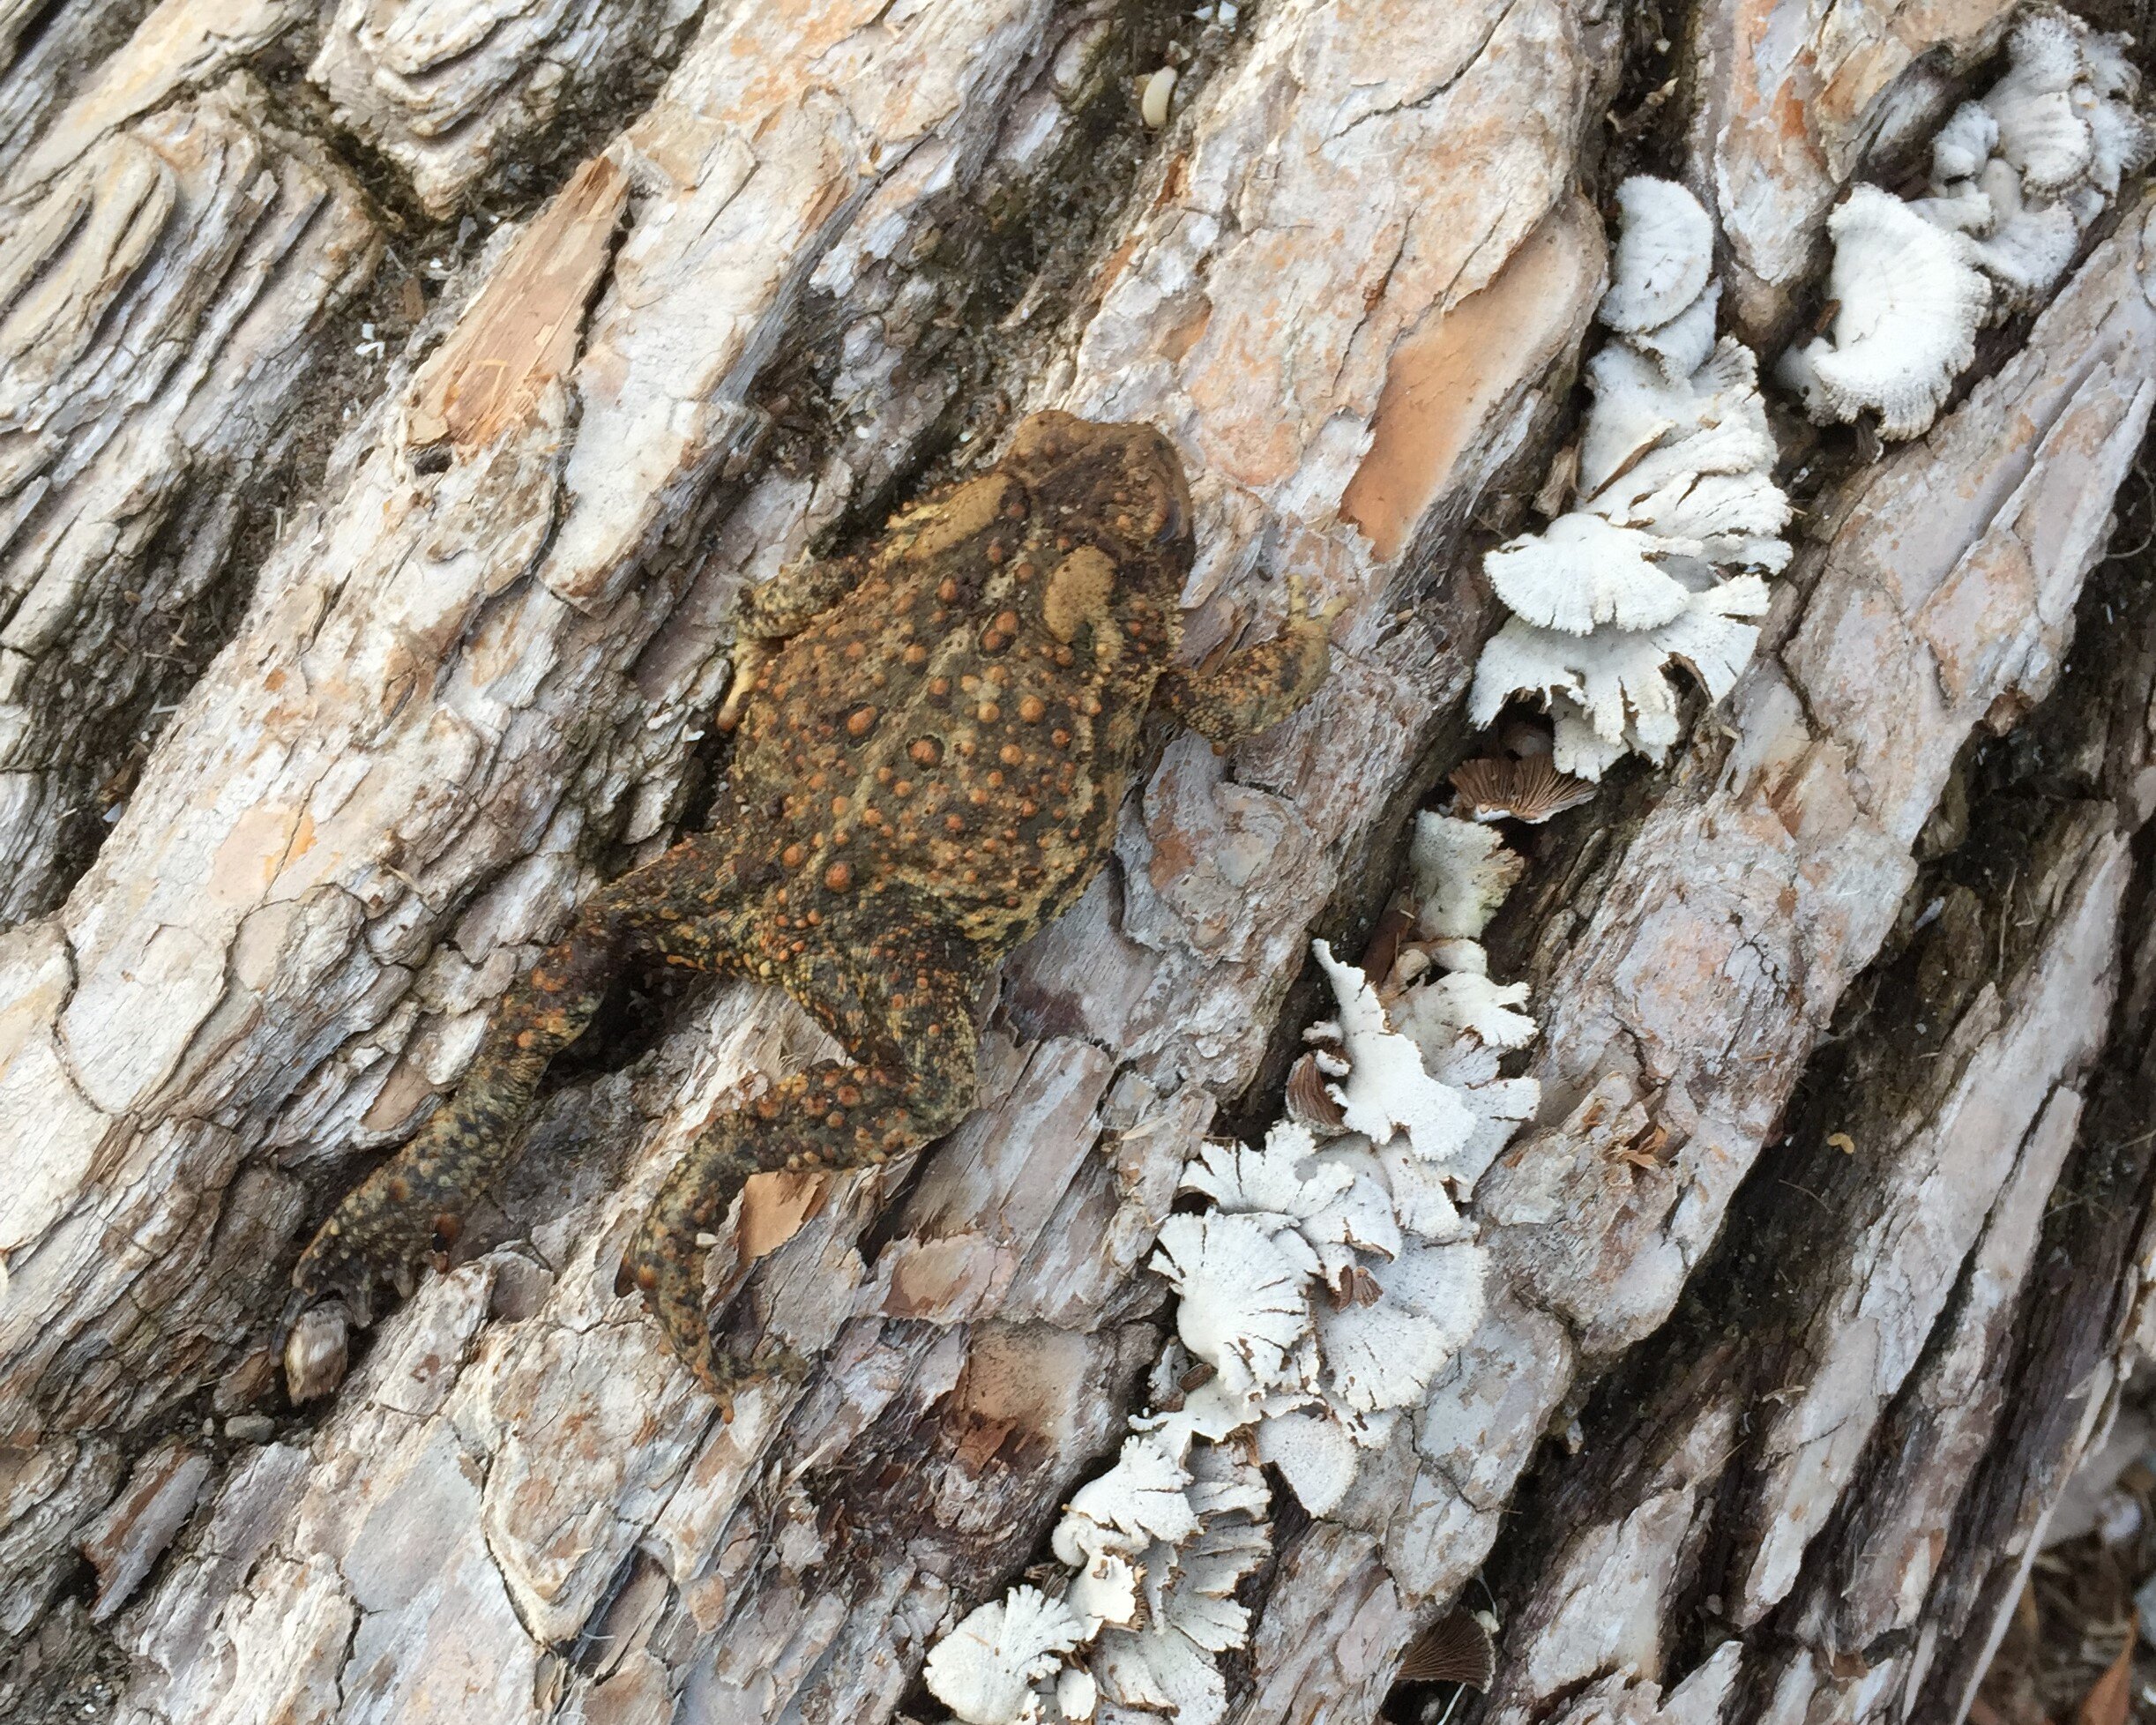 Toad of Toad Hall by the lake.